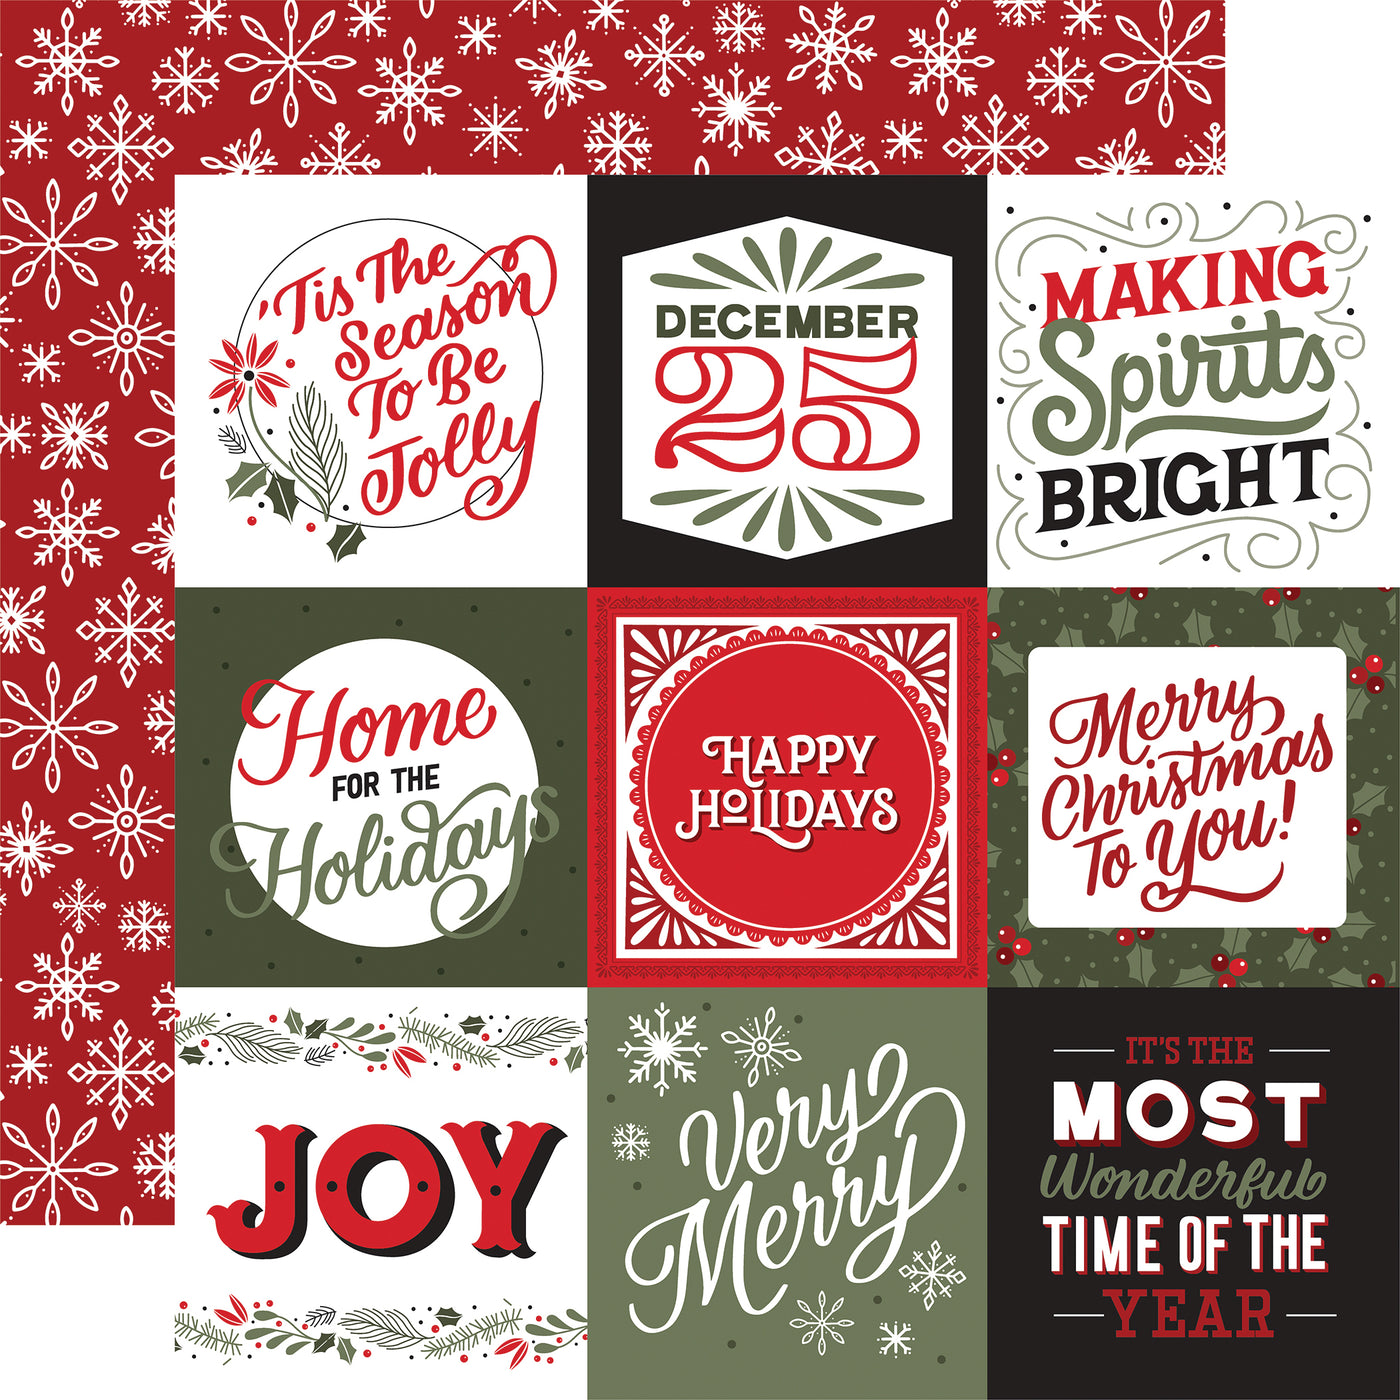 side A - fun Christmas sayings. side B - whimsical snowflakes on red background.